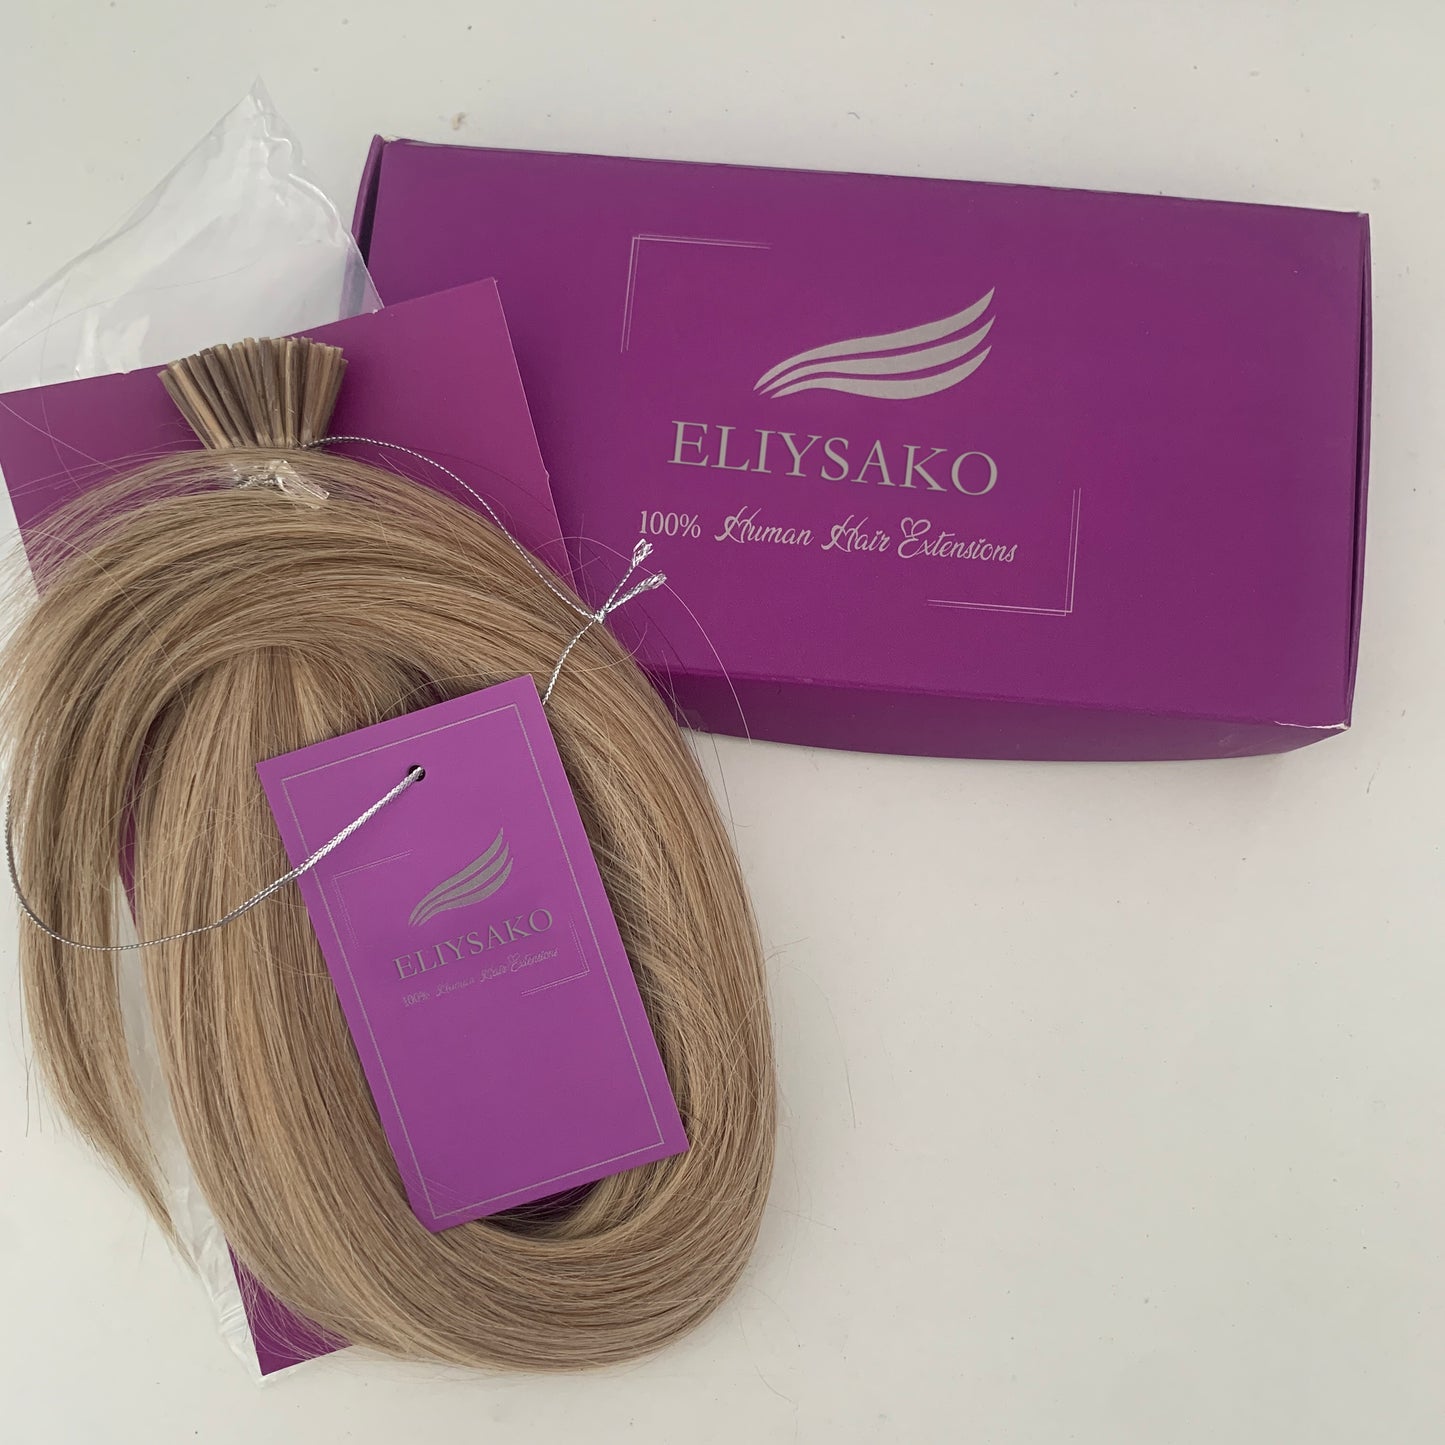 Eliysako Hair Extensions Human Hair Light Blonde Highlighted Golden Blonde 16 Inch 100g Wire Hair Extensions Secret Real Extensions with Line Invisible Hairpiece